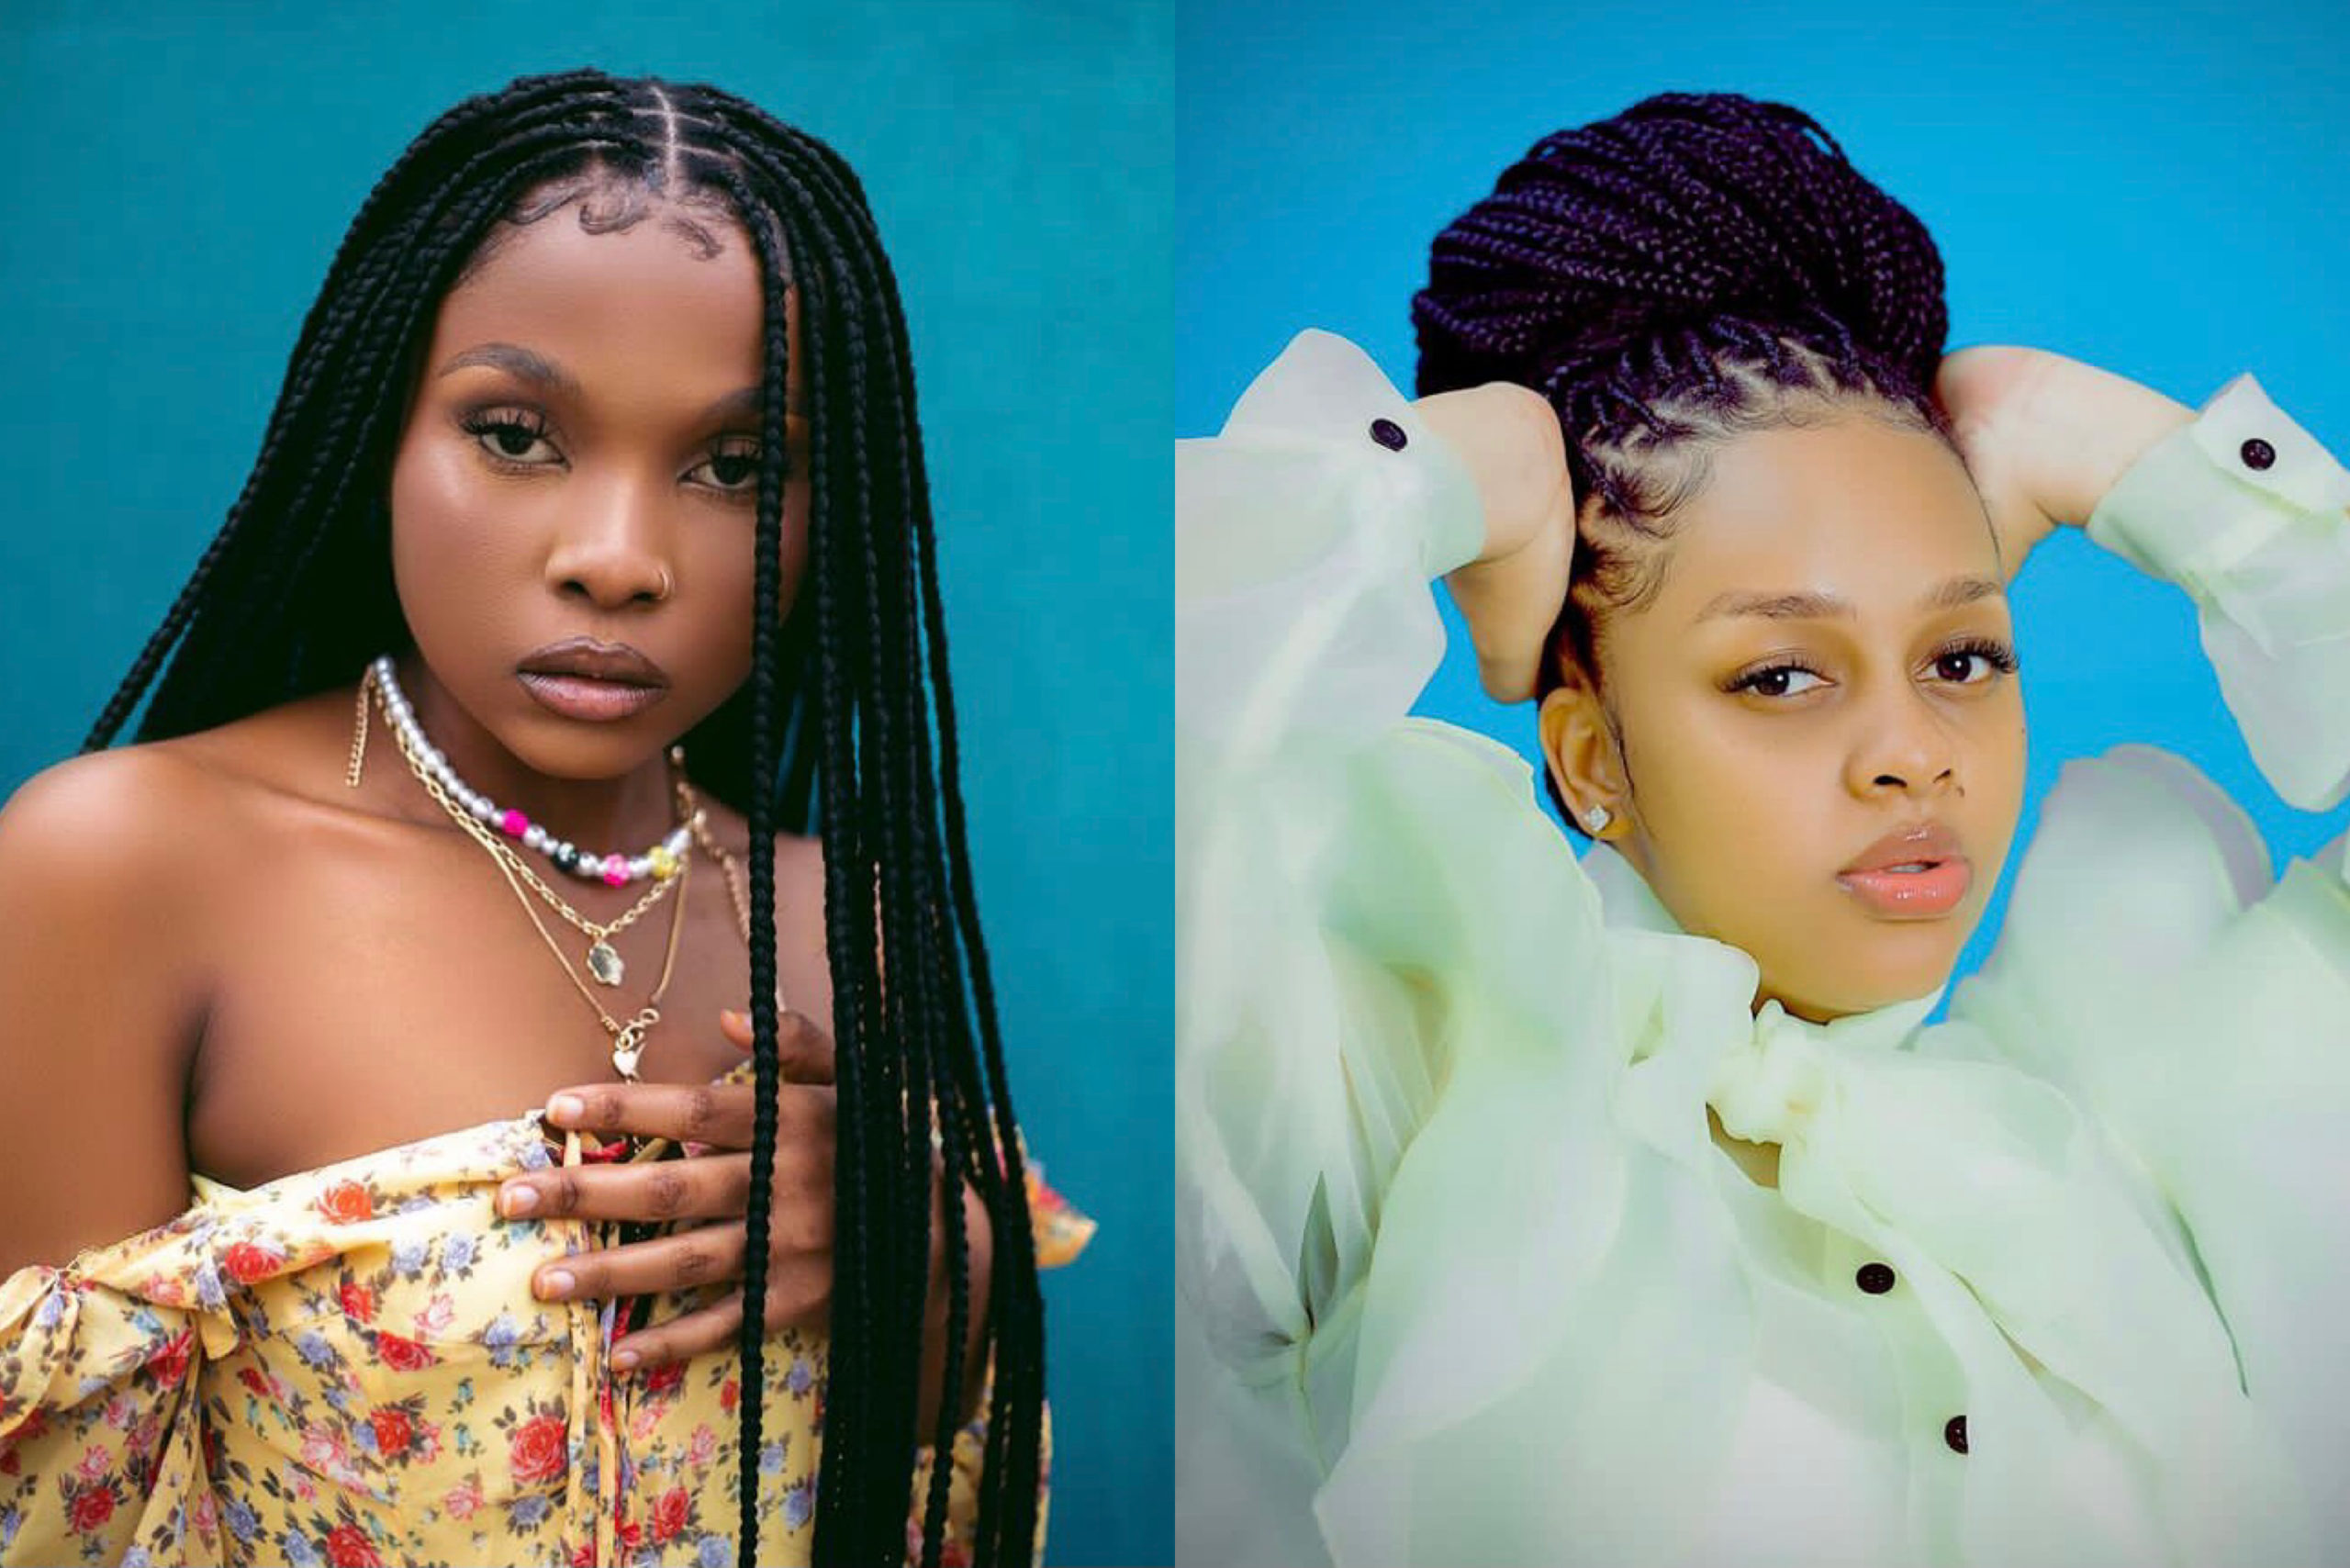 Beef brewing between Pregnant singer Nandy & Zuchu over multimillion deal? (Voice note)